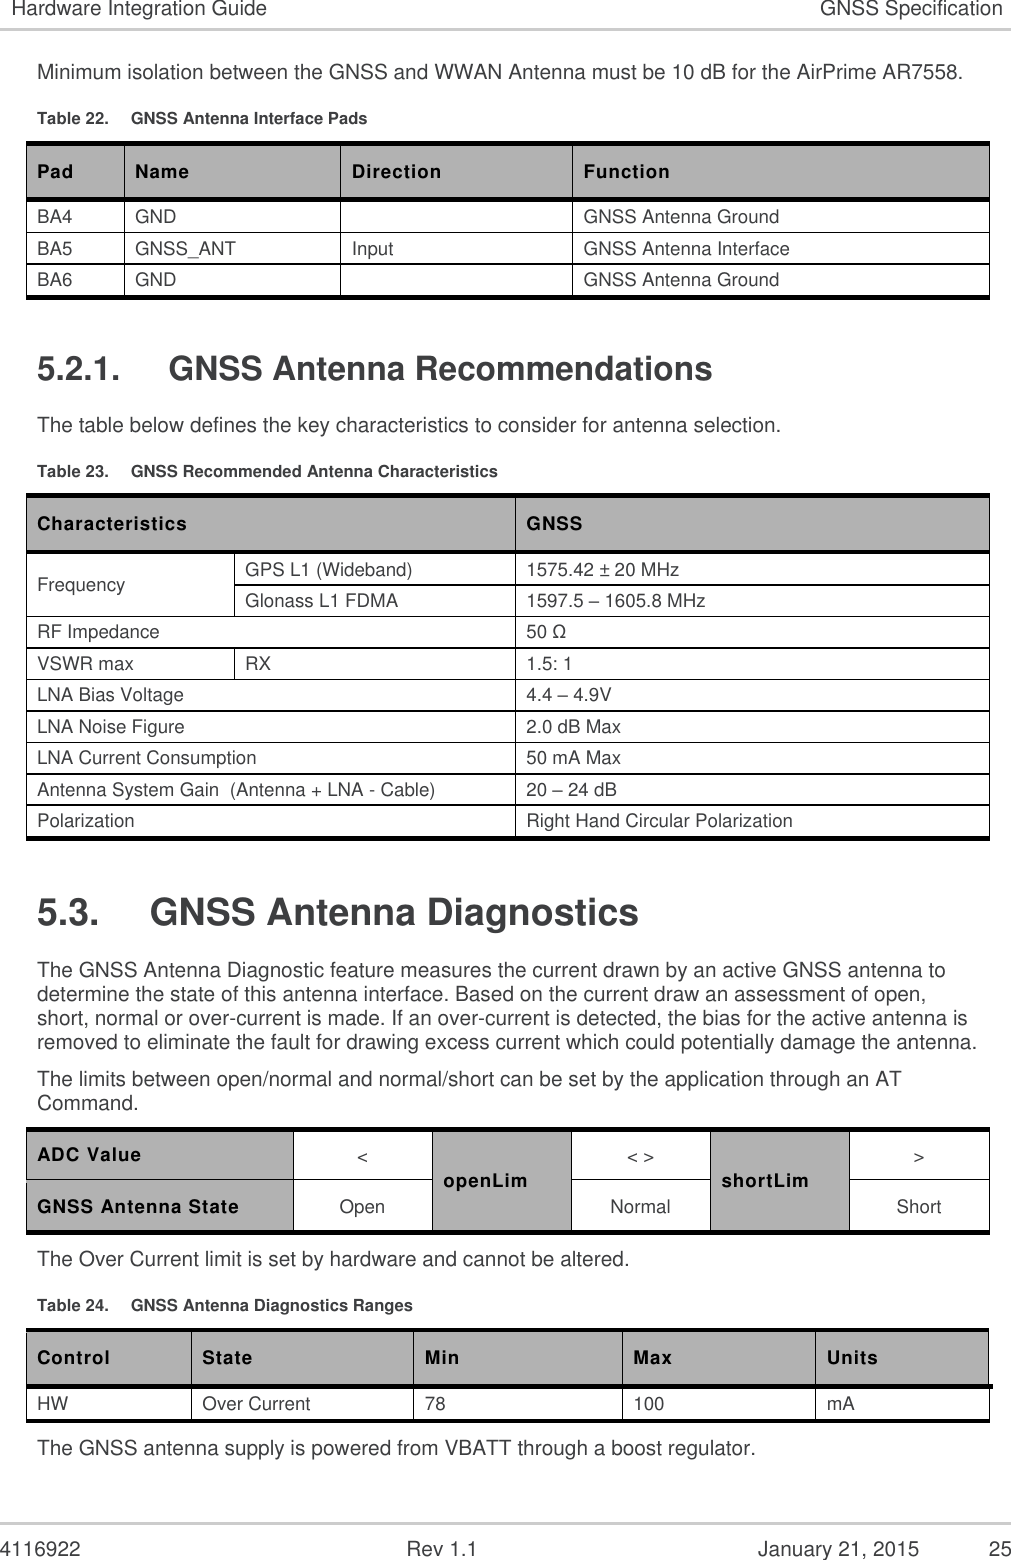   4116922              Rev 1.1          January 21, 2015  25 Hardware Integration Guide GNSS Specification Minimum isolation between the GNSS and WWAN Antenna must be 10 dB for the AirPrime AR7558. Table 22.  GNSS Antenna Interface Pads Pad Name Direction Function BA4 GND  GNSS Antenna Ground BA5 GNSS_ANT Input GNSS Antenna Interface BA6 GND  GNSS Antenna Ground 5.2.1.  GNSS Antenna Recommendations The table below defines the key characteristics to consider for antenna selection. Table 23.  GNSS Recommended Antenna Characteristics Characteristics GNSS Frequency GPS L1 (Wideband) 1575.42 ± 20 MHz Glonass L1 FDMA 1597.5 – 1605.8 MHz RF Impedance 50 Ω VSWR max RX 1.5: 1 LNA Bias Voltage 4.4 – 4.9V LNA Noise Figure 2.0 dB Max LNA Current Consumption 50 mA Max Antenna System Gain  (Antenna + LNA - Cable) 20 – 24 dB Polarization Right Hand Circular Polarization 5.3.  GNSS Antenna Diagnostics The GNSS Antenna Diagnostic feature measures the current drawn by an active GNSS antenna to determine the state of this antenna interface. Based on the current draw an assessment of open, short, normal or over-current is made. If an over-current is detected, the bias for the active antenna is removed to eliminate the fault for drawing excess current which could potentially damage the antenna. The limits between open/normal and normal/short can be set by the application through an AT Command. ADC Value &lt; openLim &lt; &gt; shortLim &gt; GNSS Antenna State Open Normal Short The Over Current limit is set by hardware and cannot be altered. Table 24.  GNSS Antenna Diagnostics Ranges Control State Min Max Units HW Over Current 78 100 mA The GNSS antenna supply is powered from VBATT through a boost regulator. 